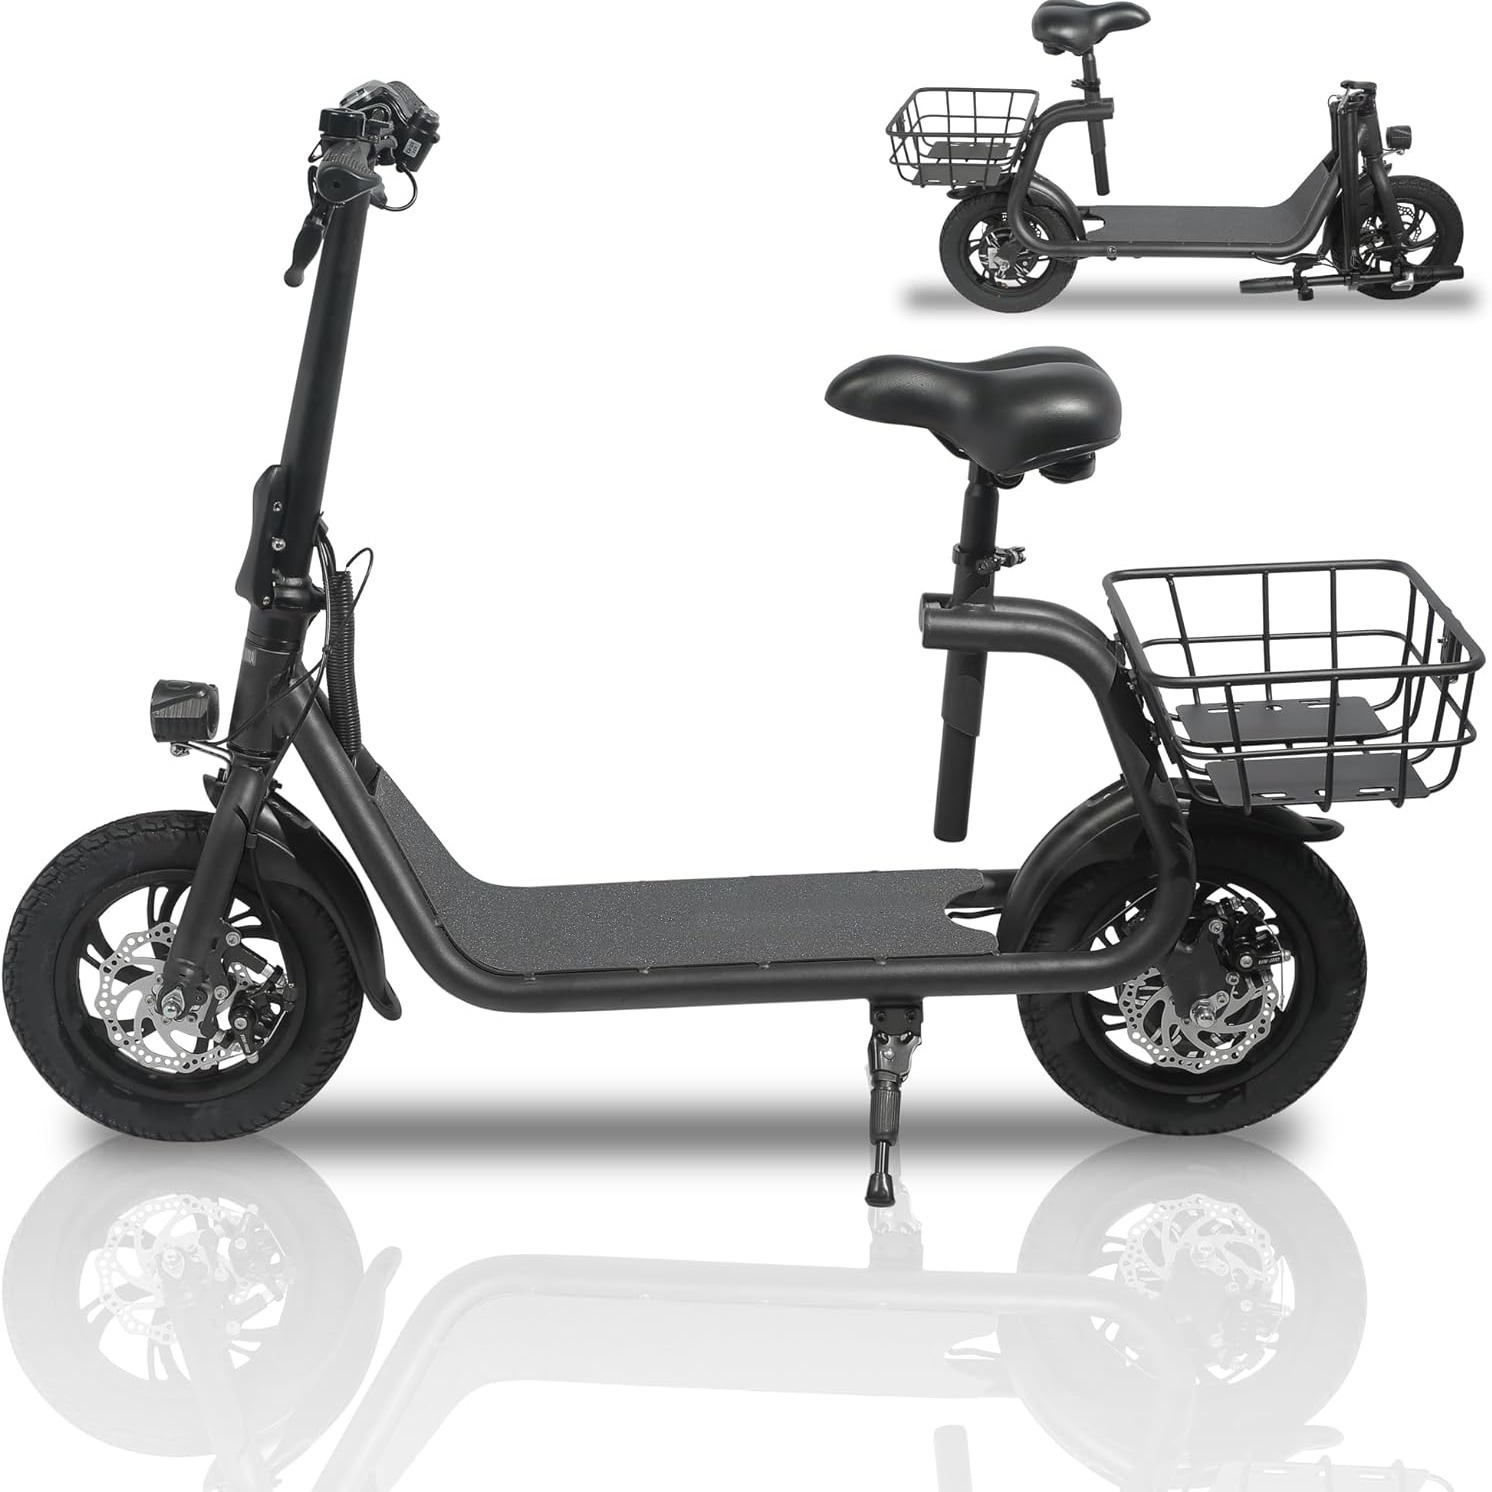 

Sports R1 Electric Scooter For Adults Scooter With Seat For Adult Foldable Electric Mopeds With 450w Brushless Motor Commuter 265lbs Max Load